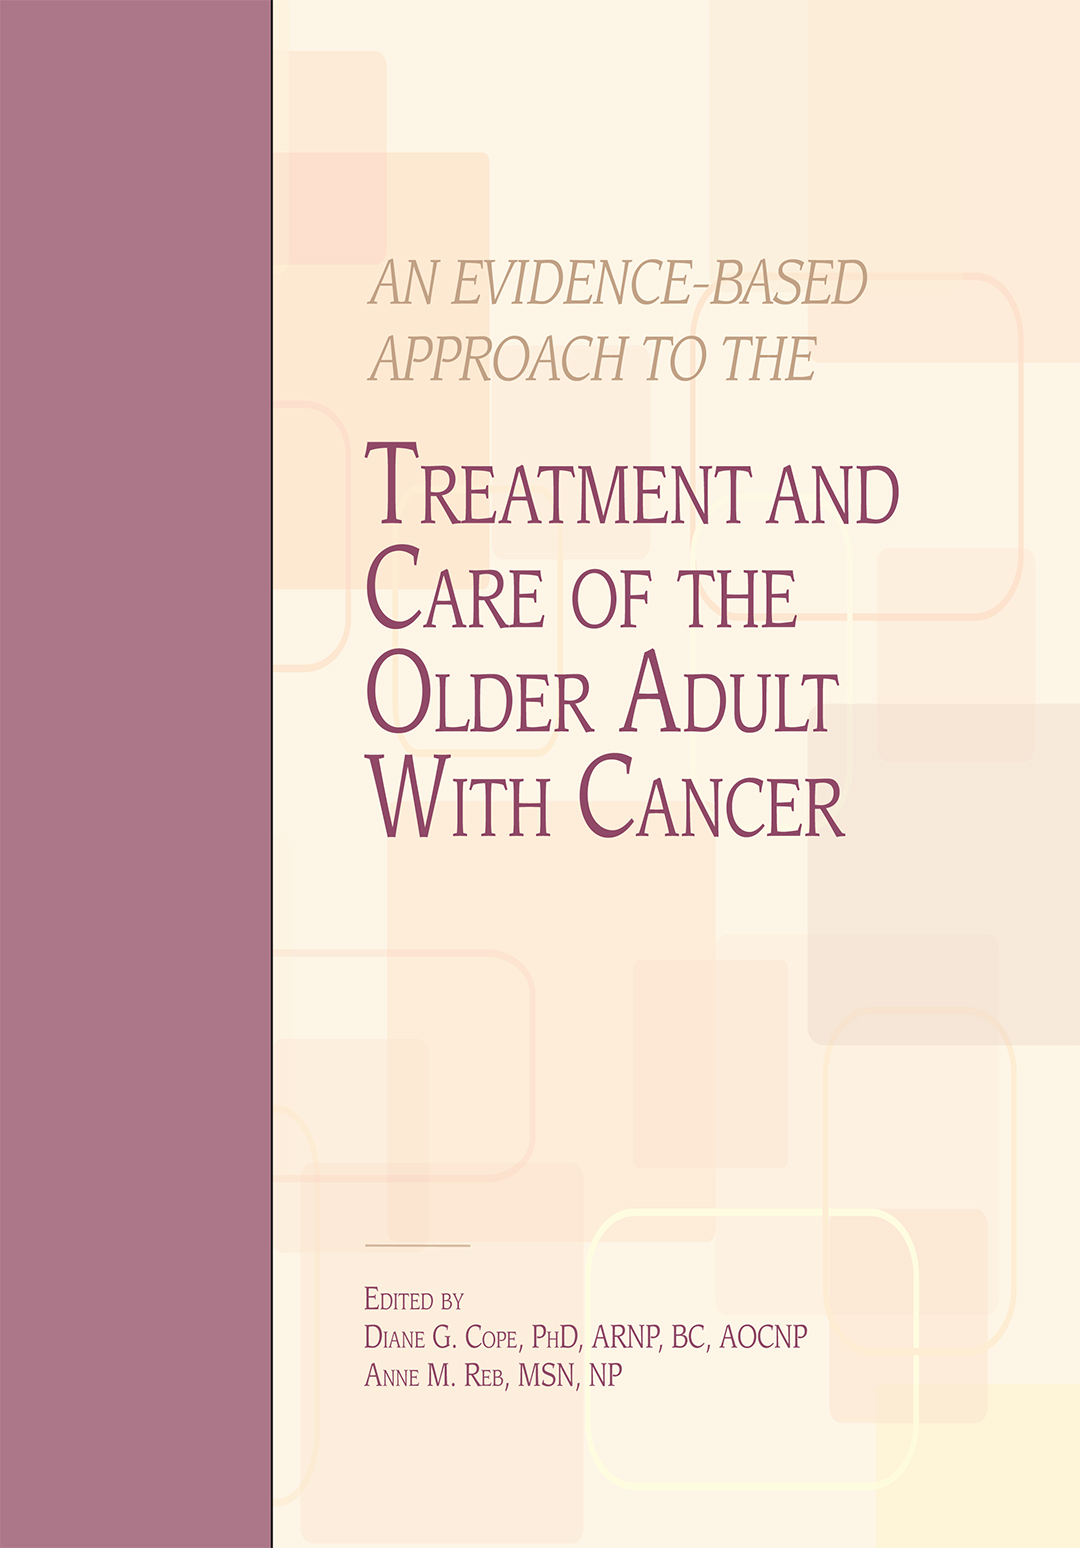 Treatment and Care of the Older Adult With Cancer